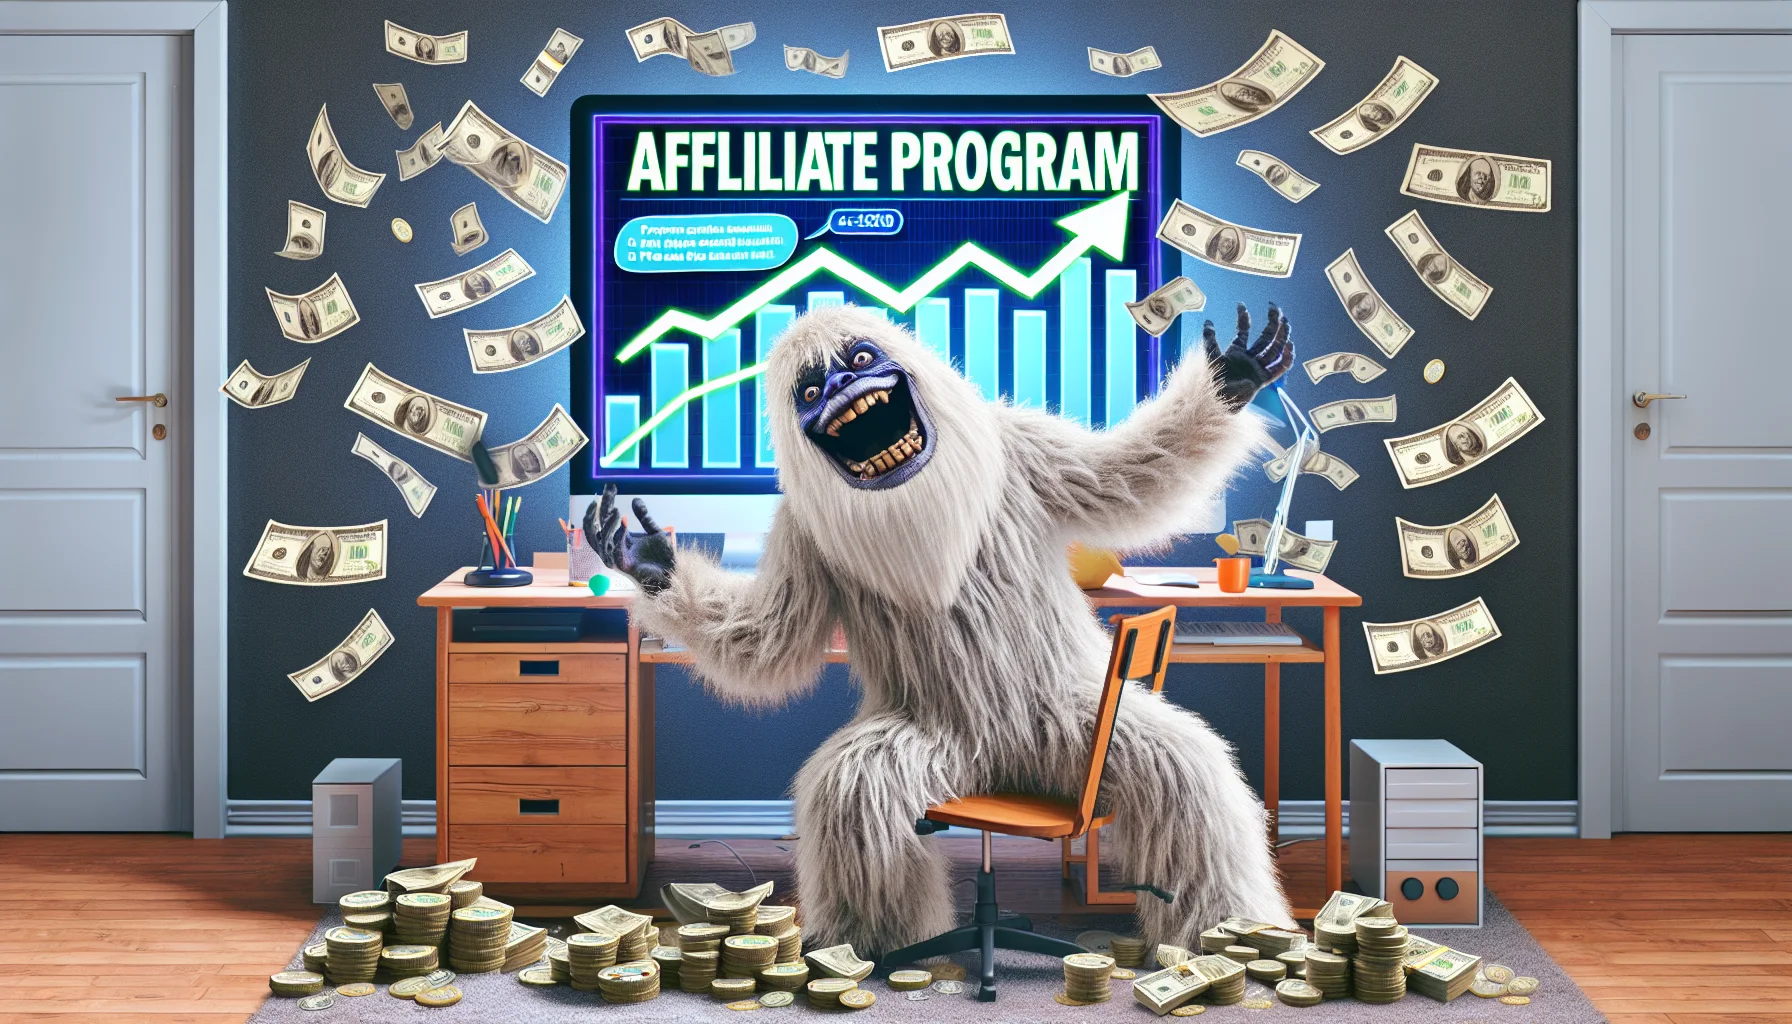 Imagine a humorous scene featuring a yeti characterized with human-like traits, working diligently in a home-office setup. This Yeti is seen sitting in front of a modern computer, ecstatically showcasing graphics of growing bar charts and dollar signs on the screen, symbolizing the success of an online affiliate program. It's waving its furry hands in the air cheerily, with 'Yeti Affiliate Program' displayed vibrantly on a banner behind it. Surrounding the Yeti, coins and bills seem to fall out of the digital realm, creating a captivating blend of the virtual and physical world. The scene highlights the allure and potential of earning money online.